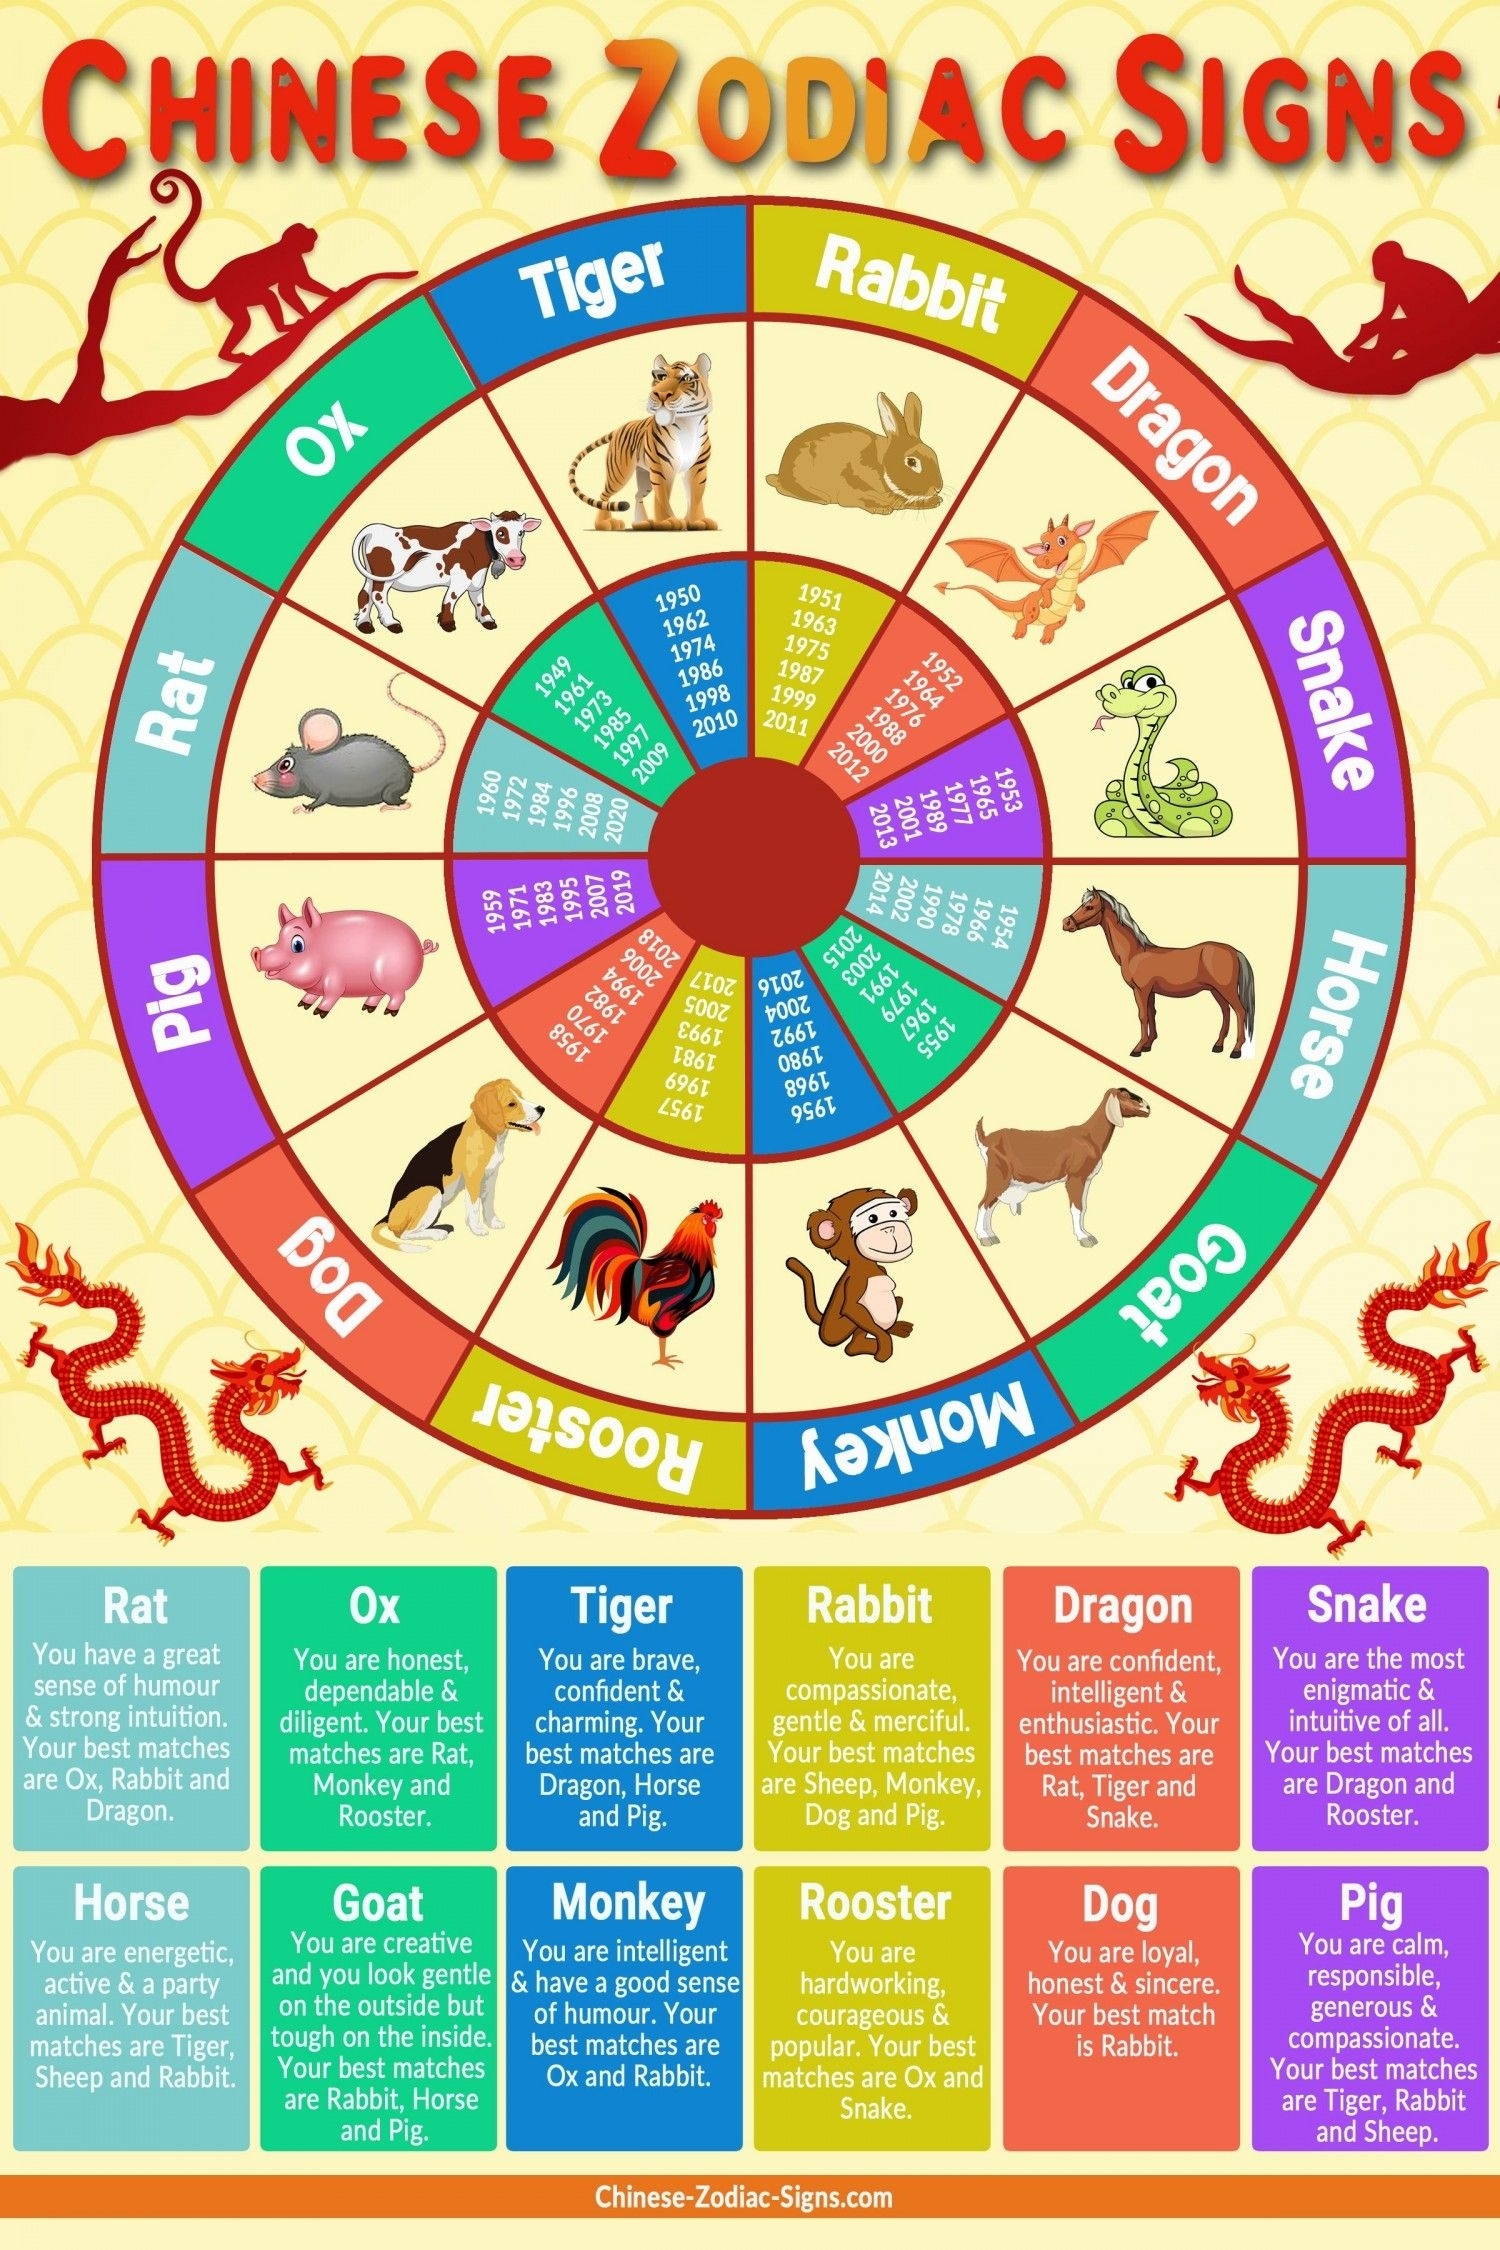 Chinese Zodiac Signs Infographic | Chinese Zodiac Signs Chinese Calendar Zodiac Sign